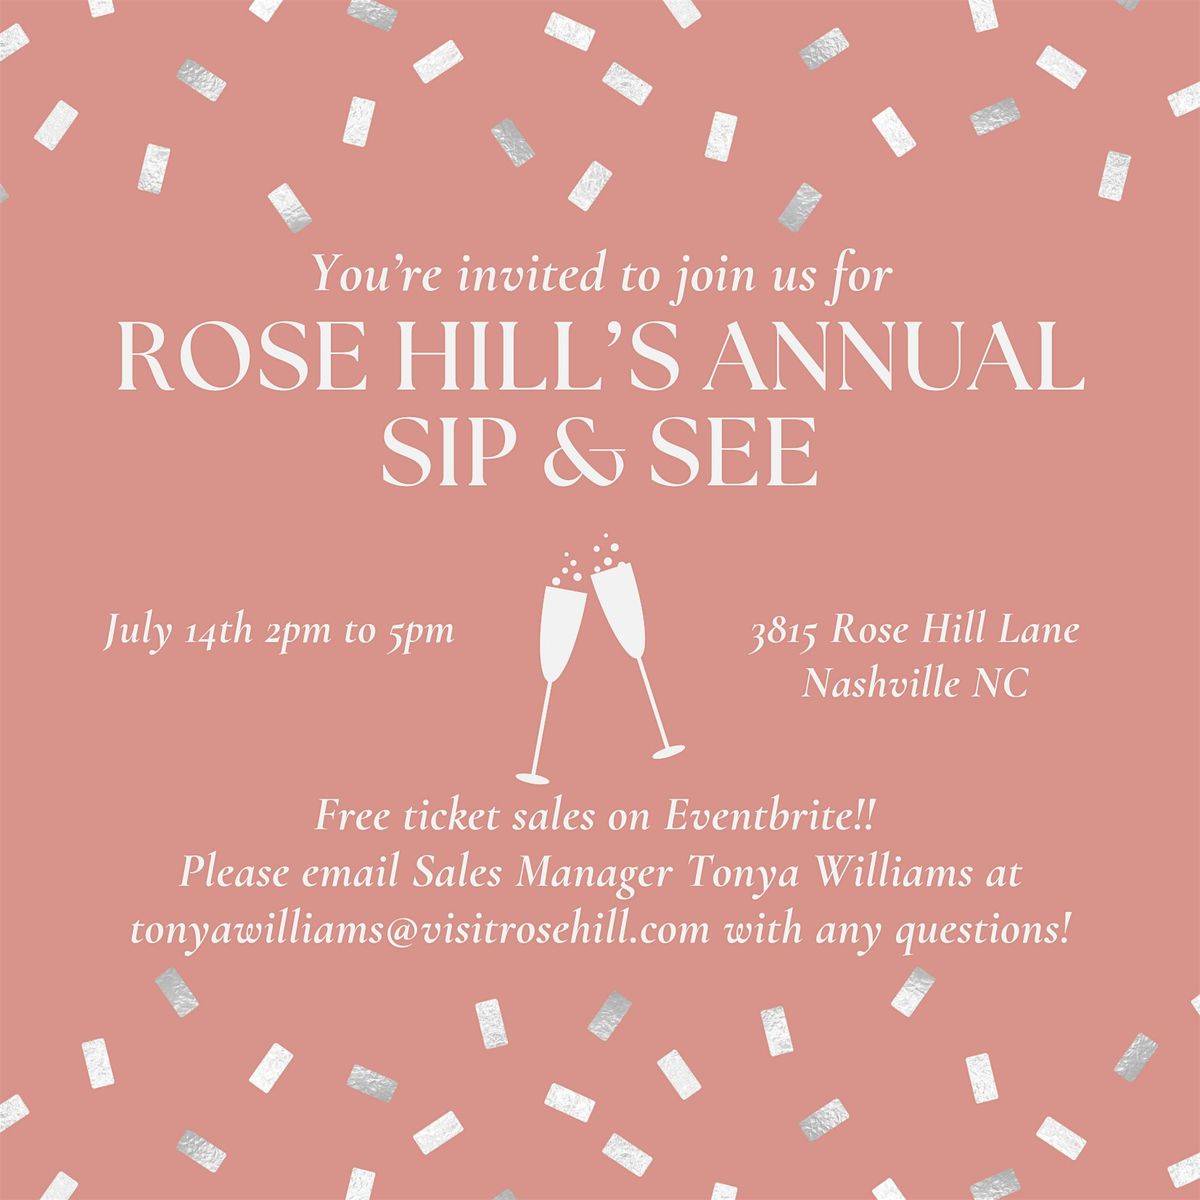 Rose Hill's Annual Sip and See